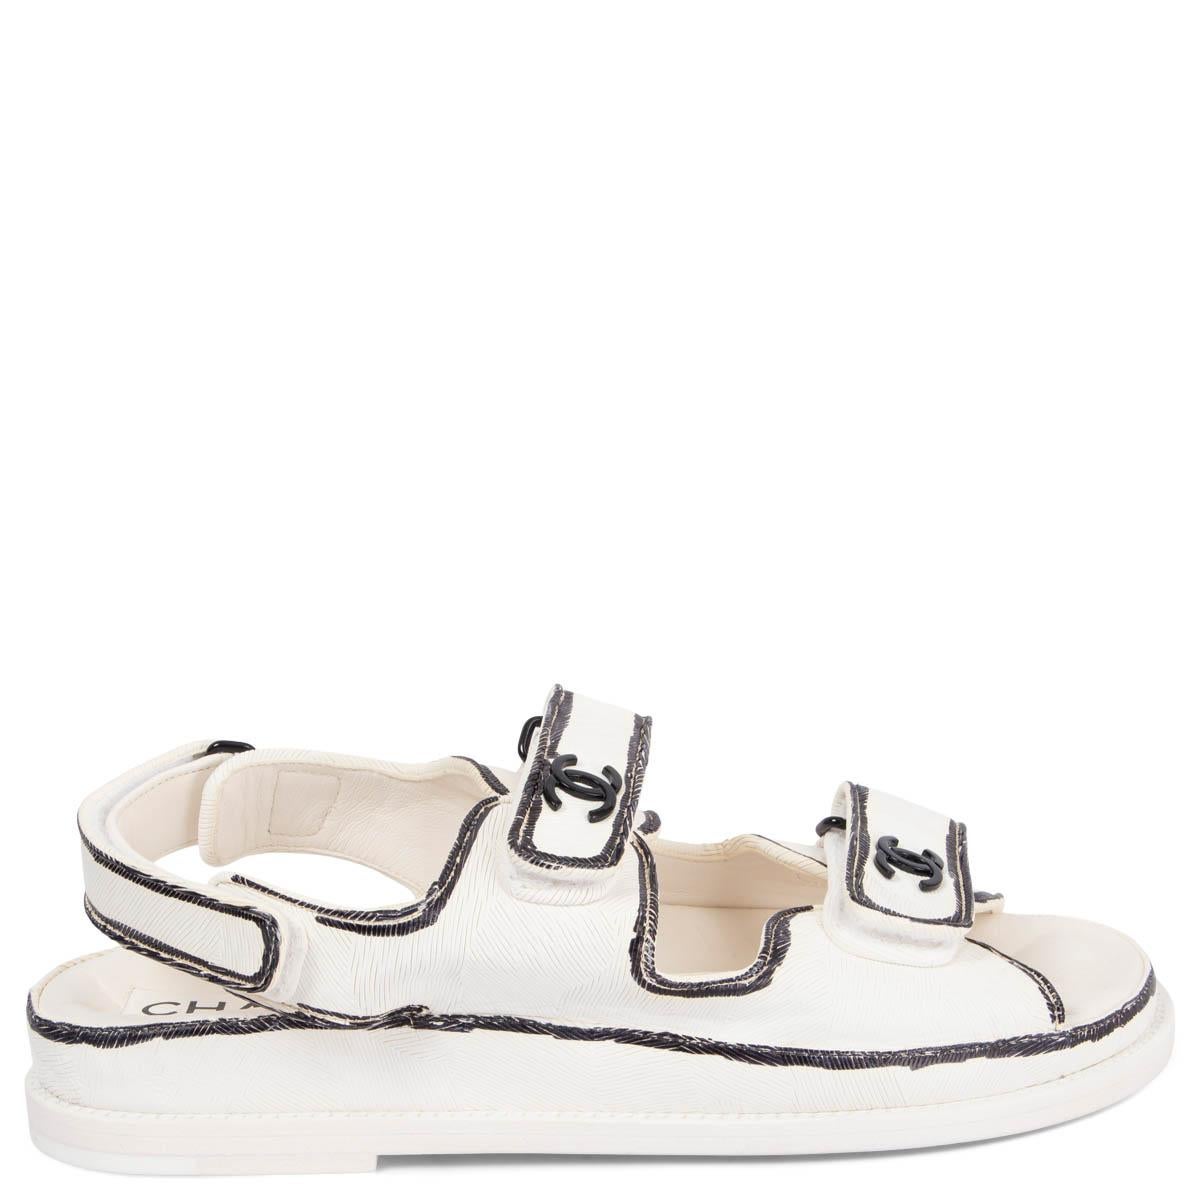 CHANEL white leather 2022 22C DUBAI PRINTED DAD Sandals Shoes 38.5 For Sale